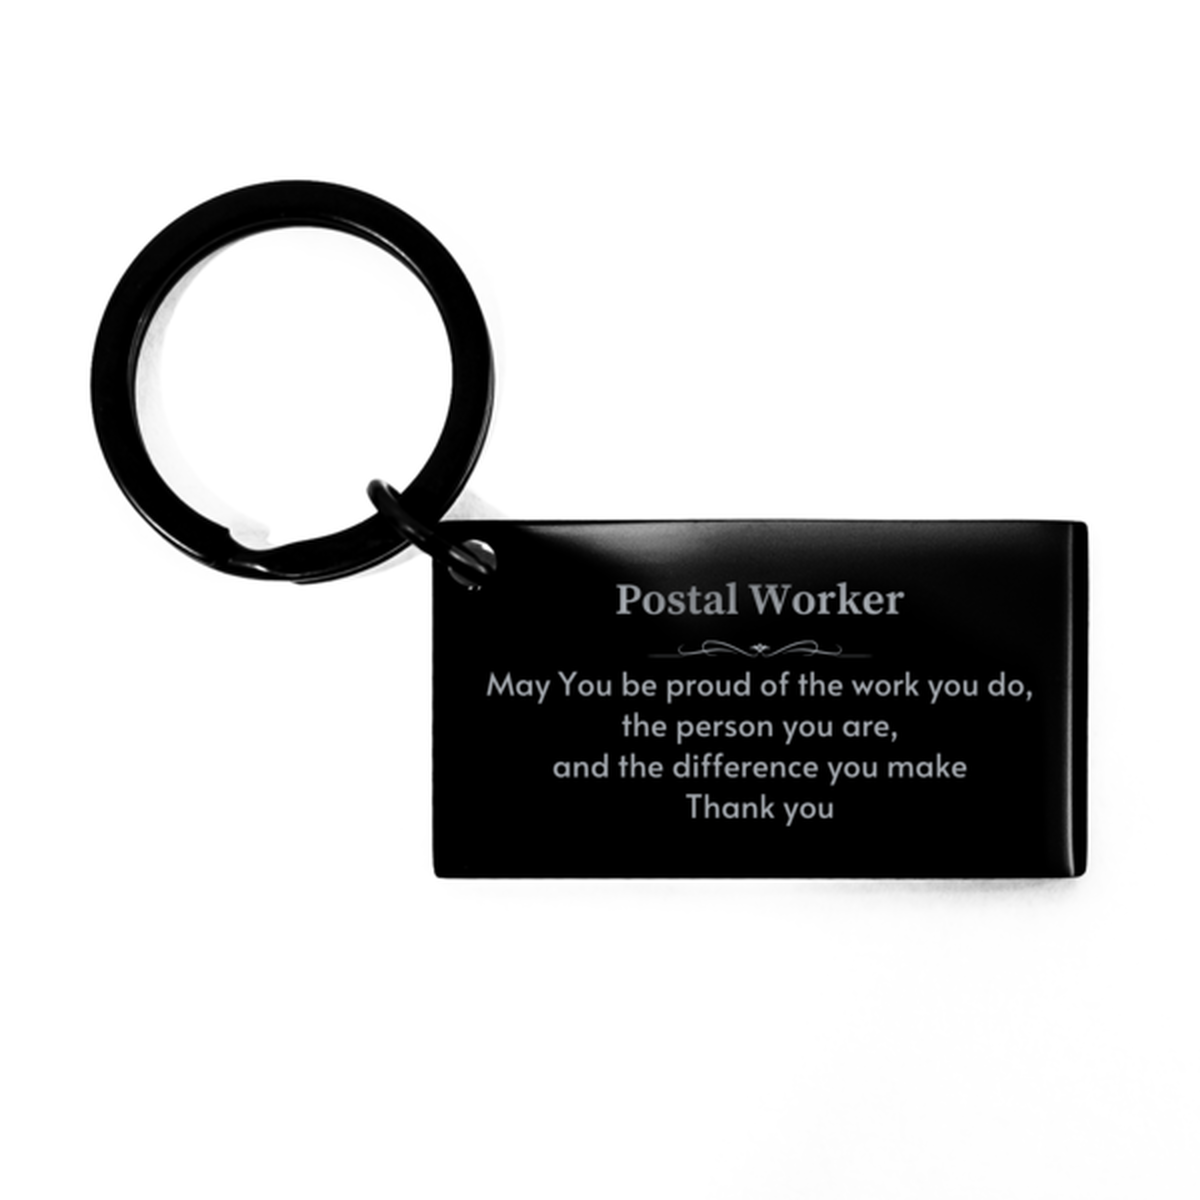 Heartwarming Keychain Retirement Coworkers Gifts for Postal Worker, Security Guard May You be proud of the work you do, the person you are Gifts for Boss Men Women Friends